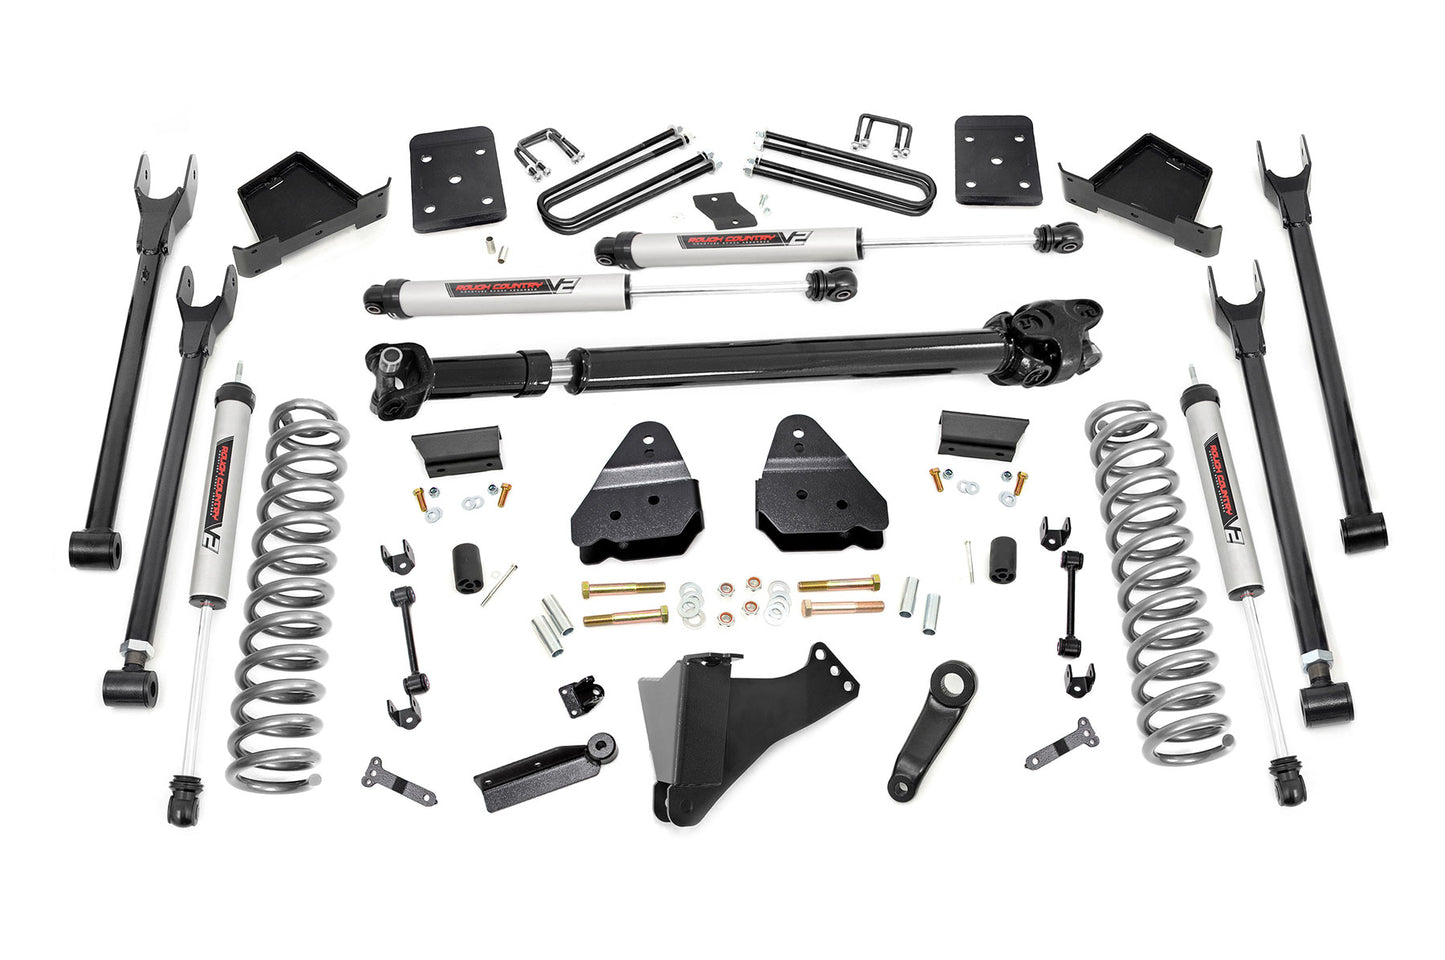 Rough Country (50771) 6 Inch Lift Kit | Diesel | 4-Link | D/S |V2 | Ford F-250/F-350 Super Duty (17-22)